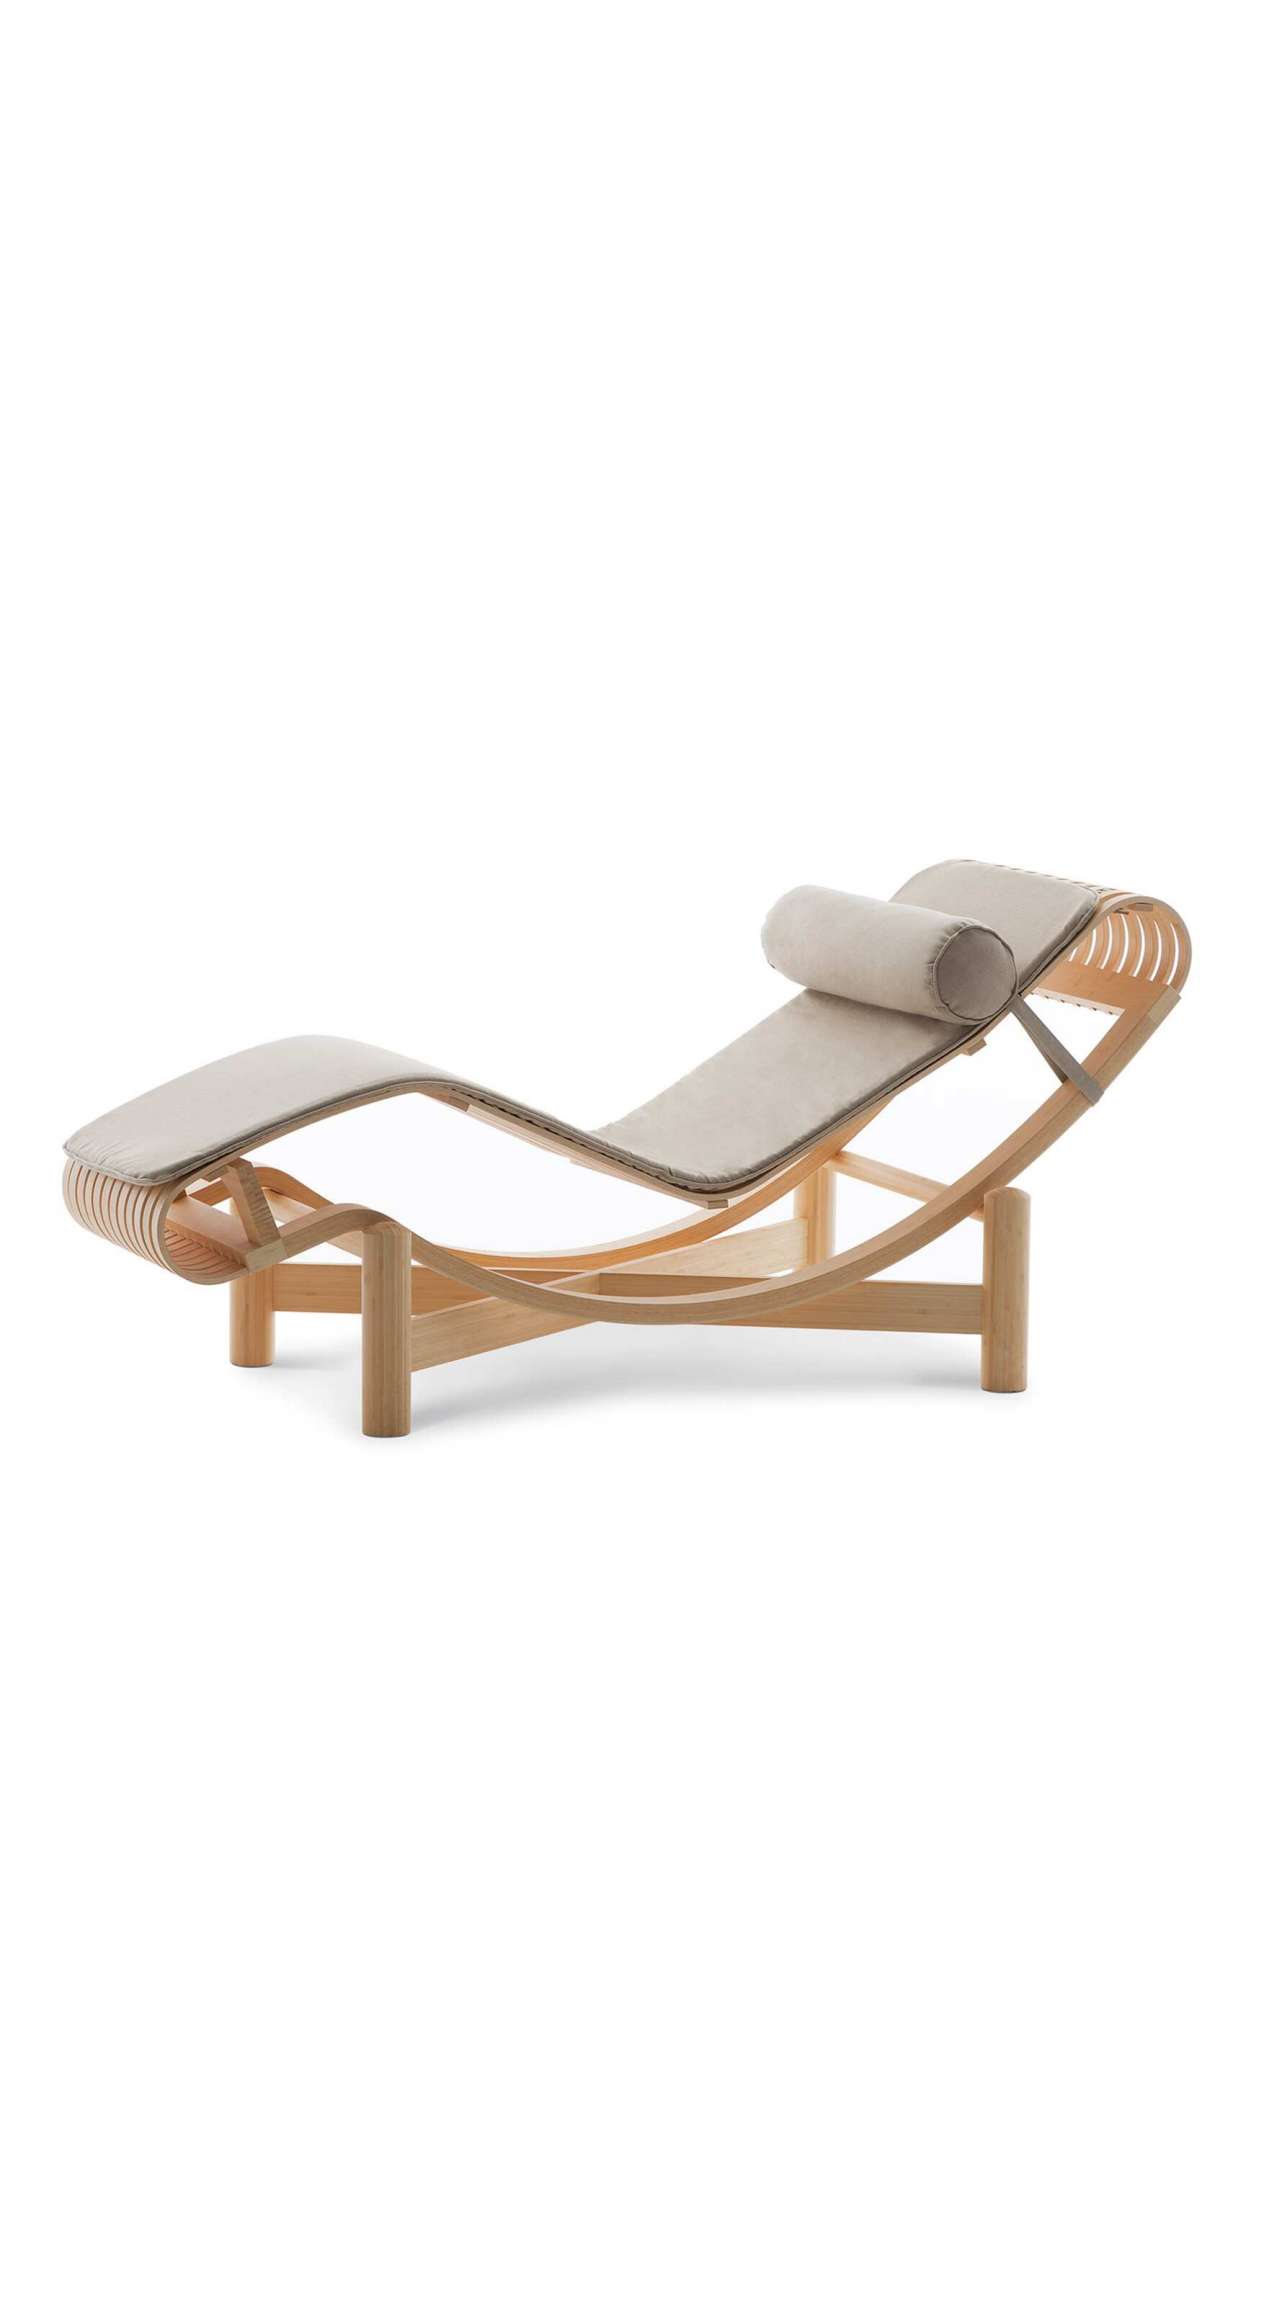 Tokyo chaise longue by Charlotte Perriand | Cassina